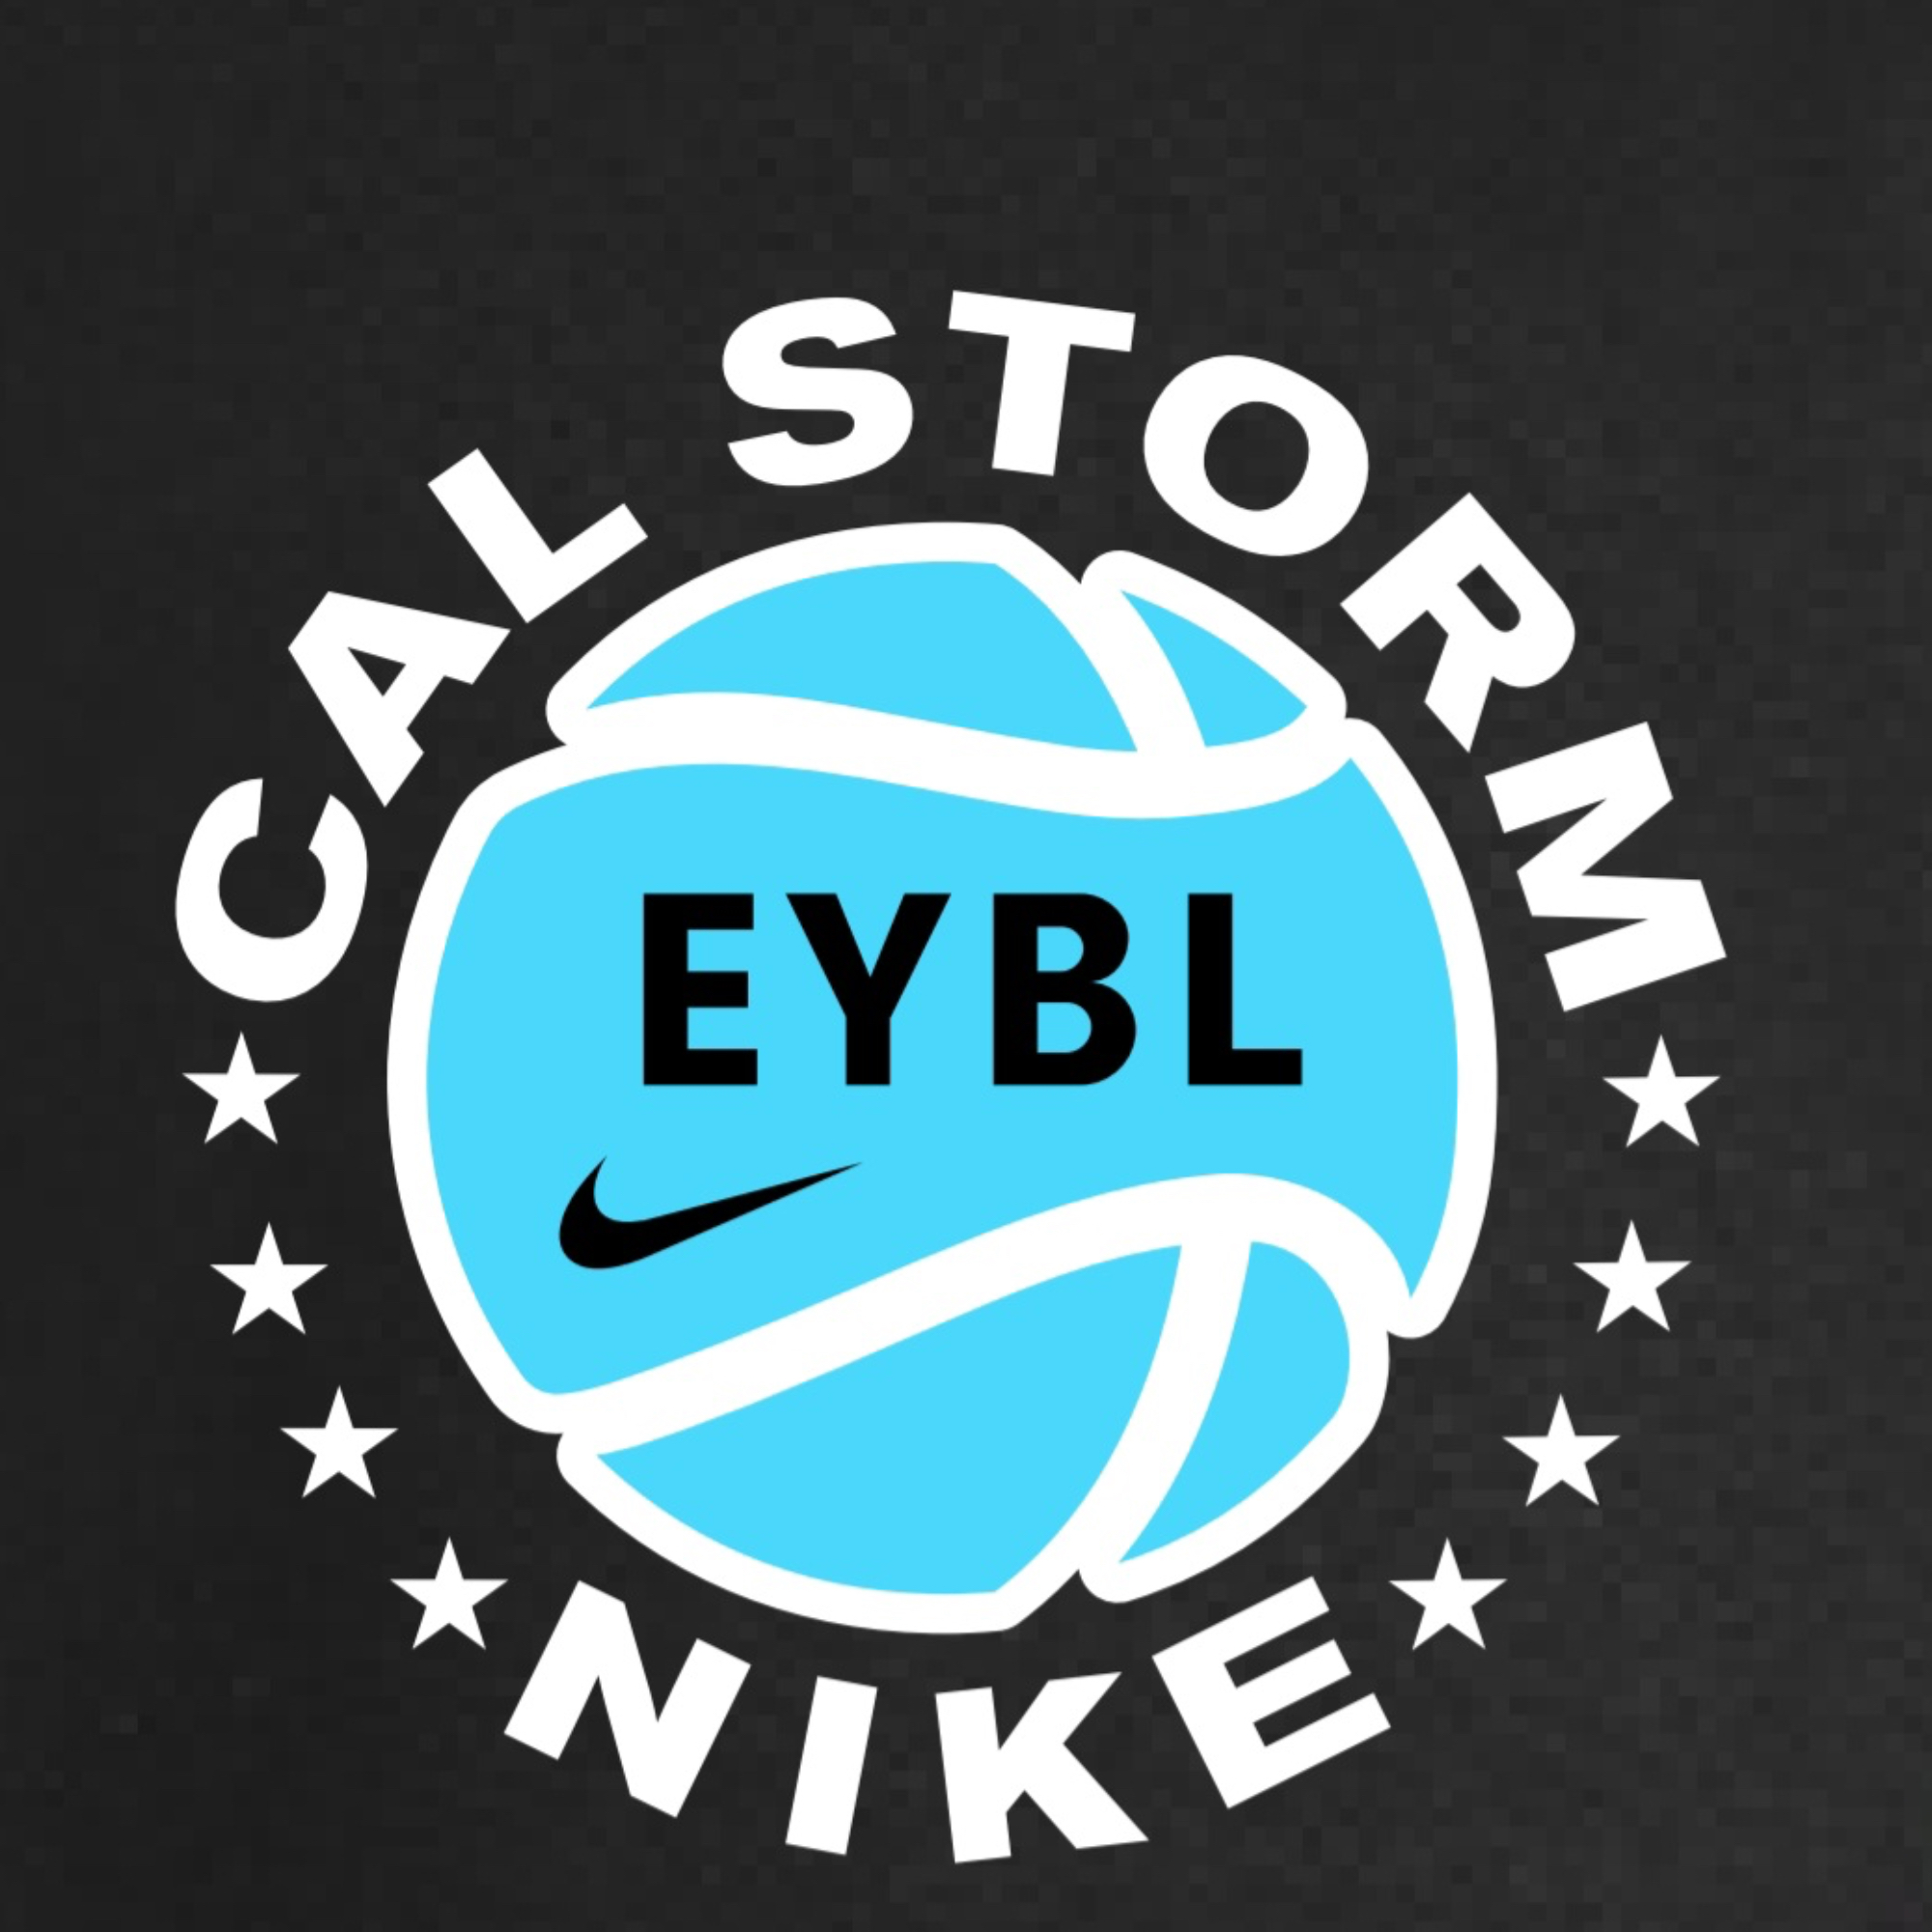 The official logo of California Storm Nike